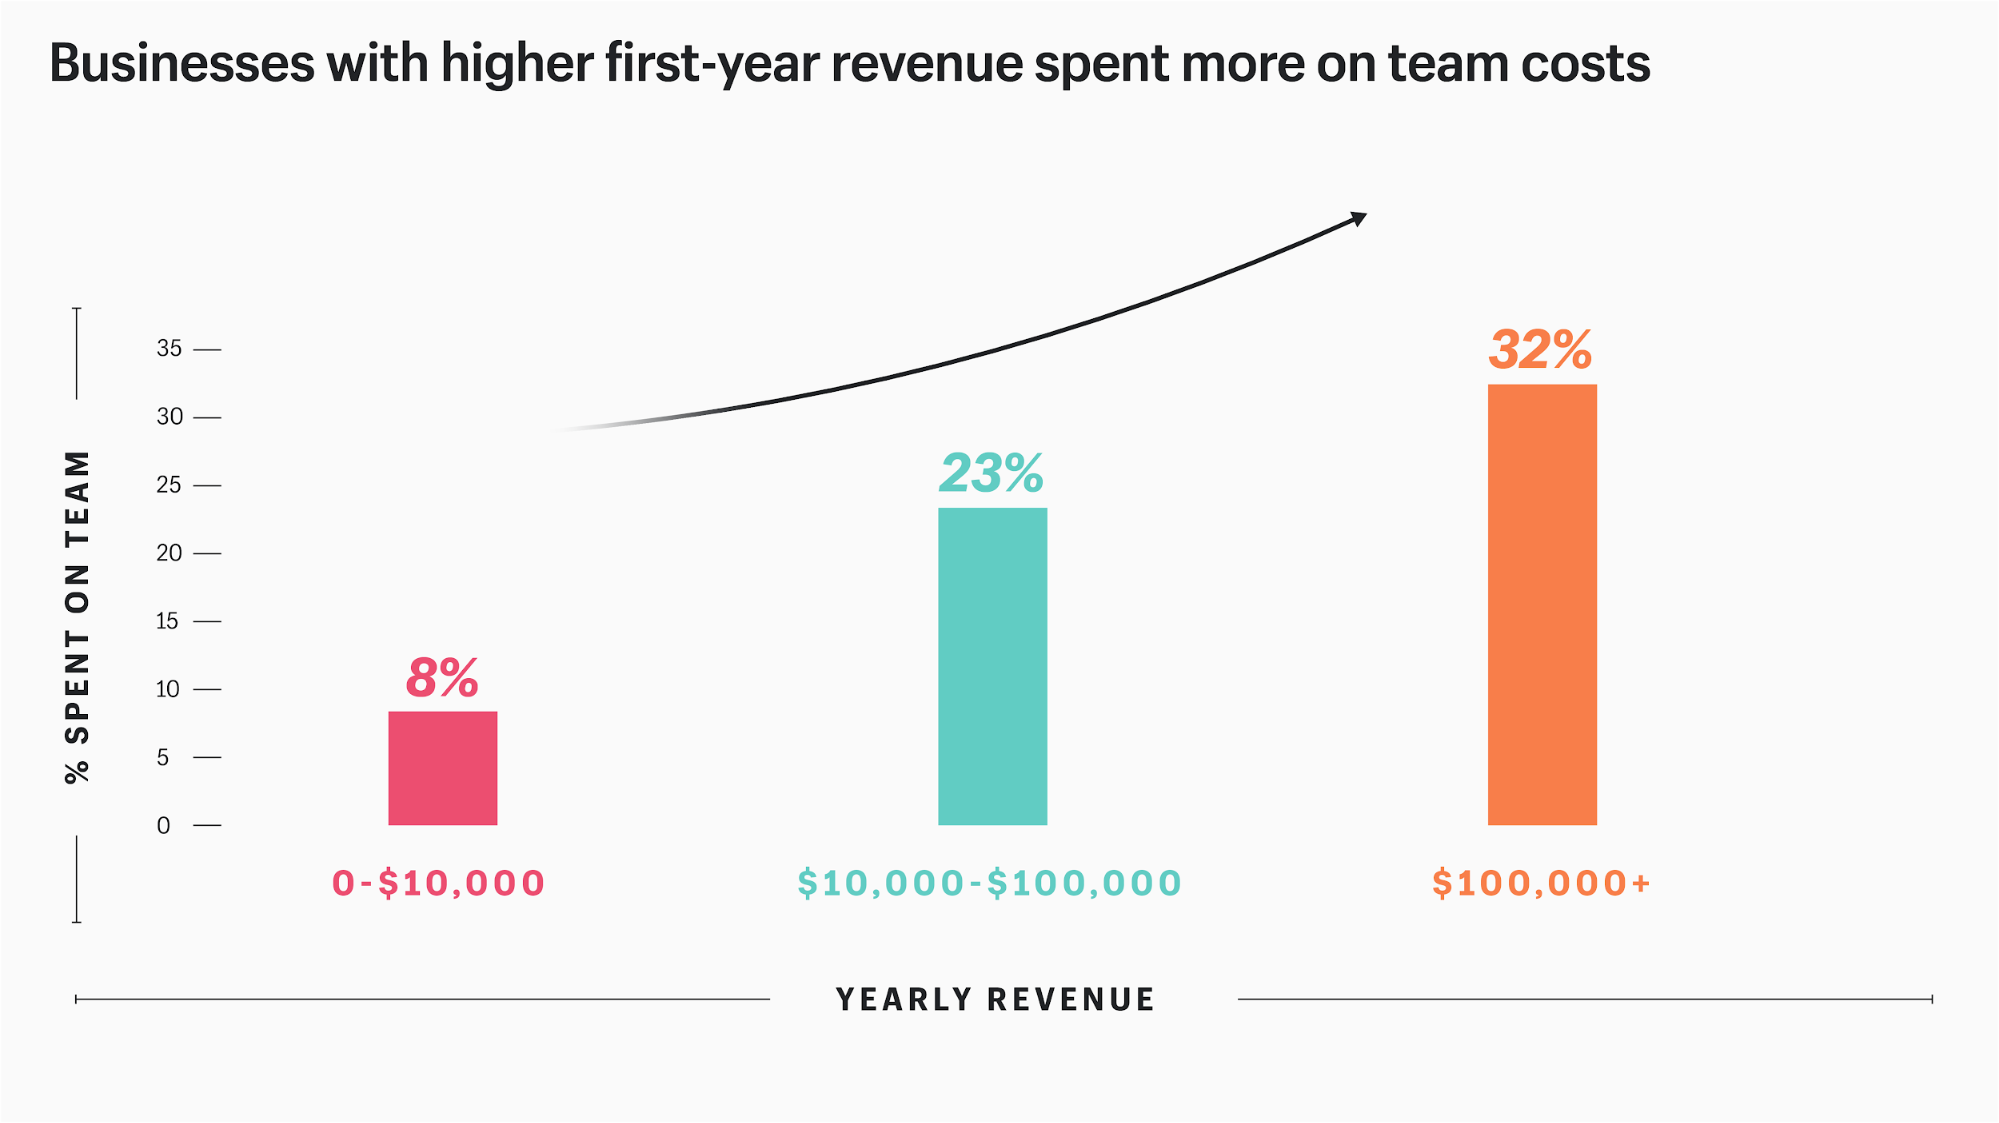 Businesses with higher revenue spend more on their team.